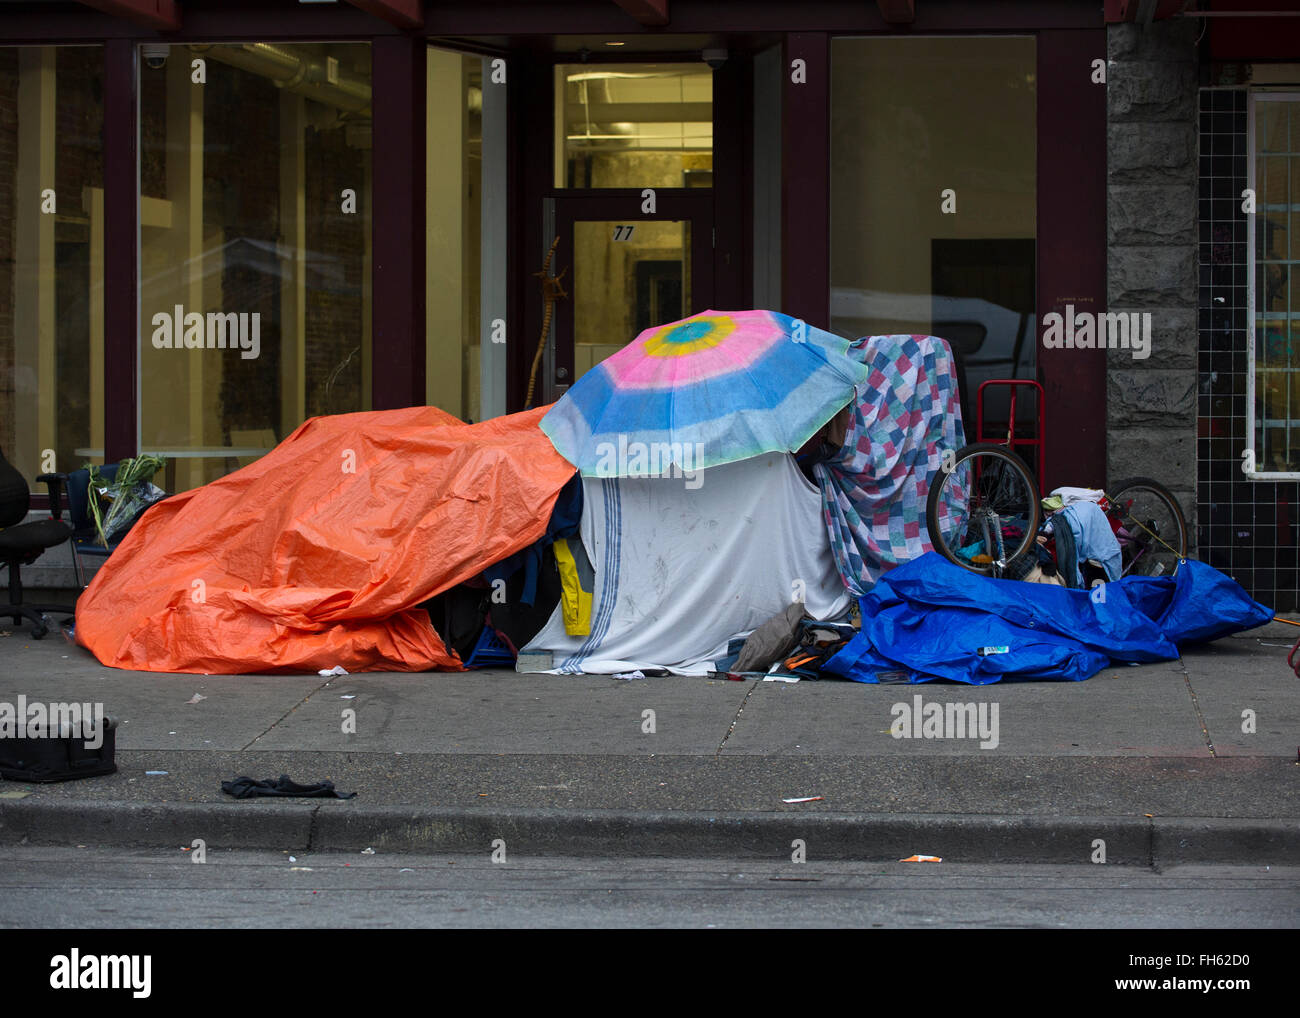 Multiply items used to construct weather protection, Vancouver Downtown Eastside Stock Photo